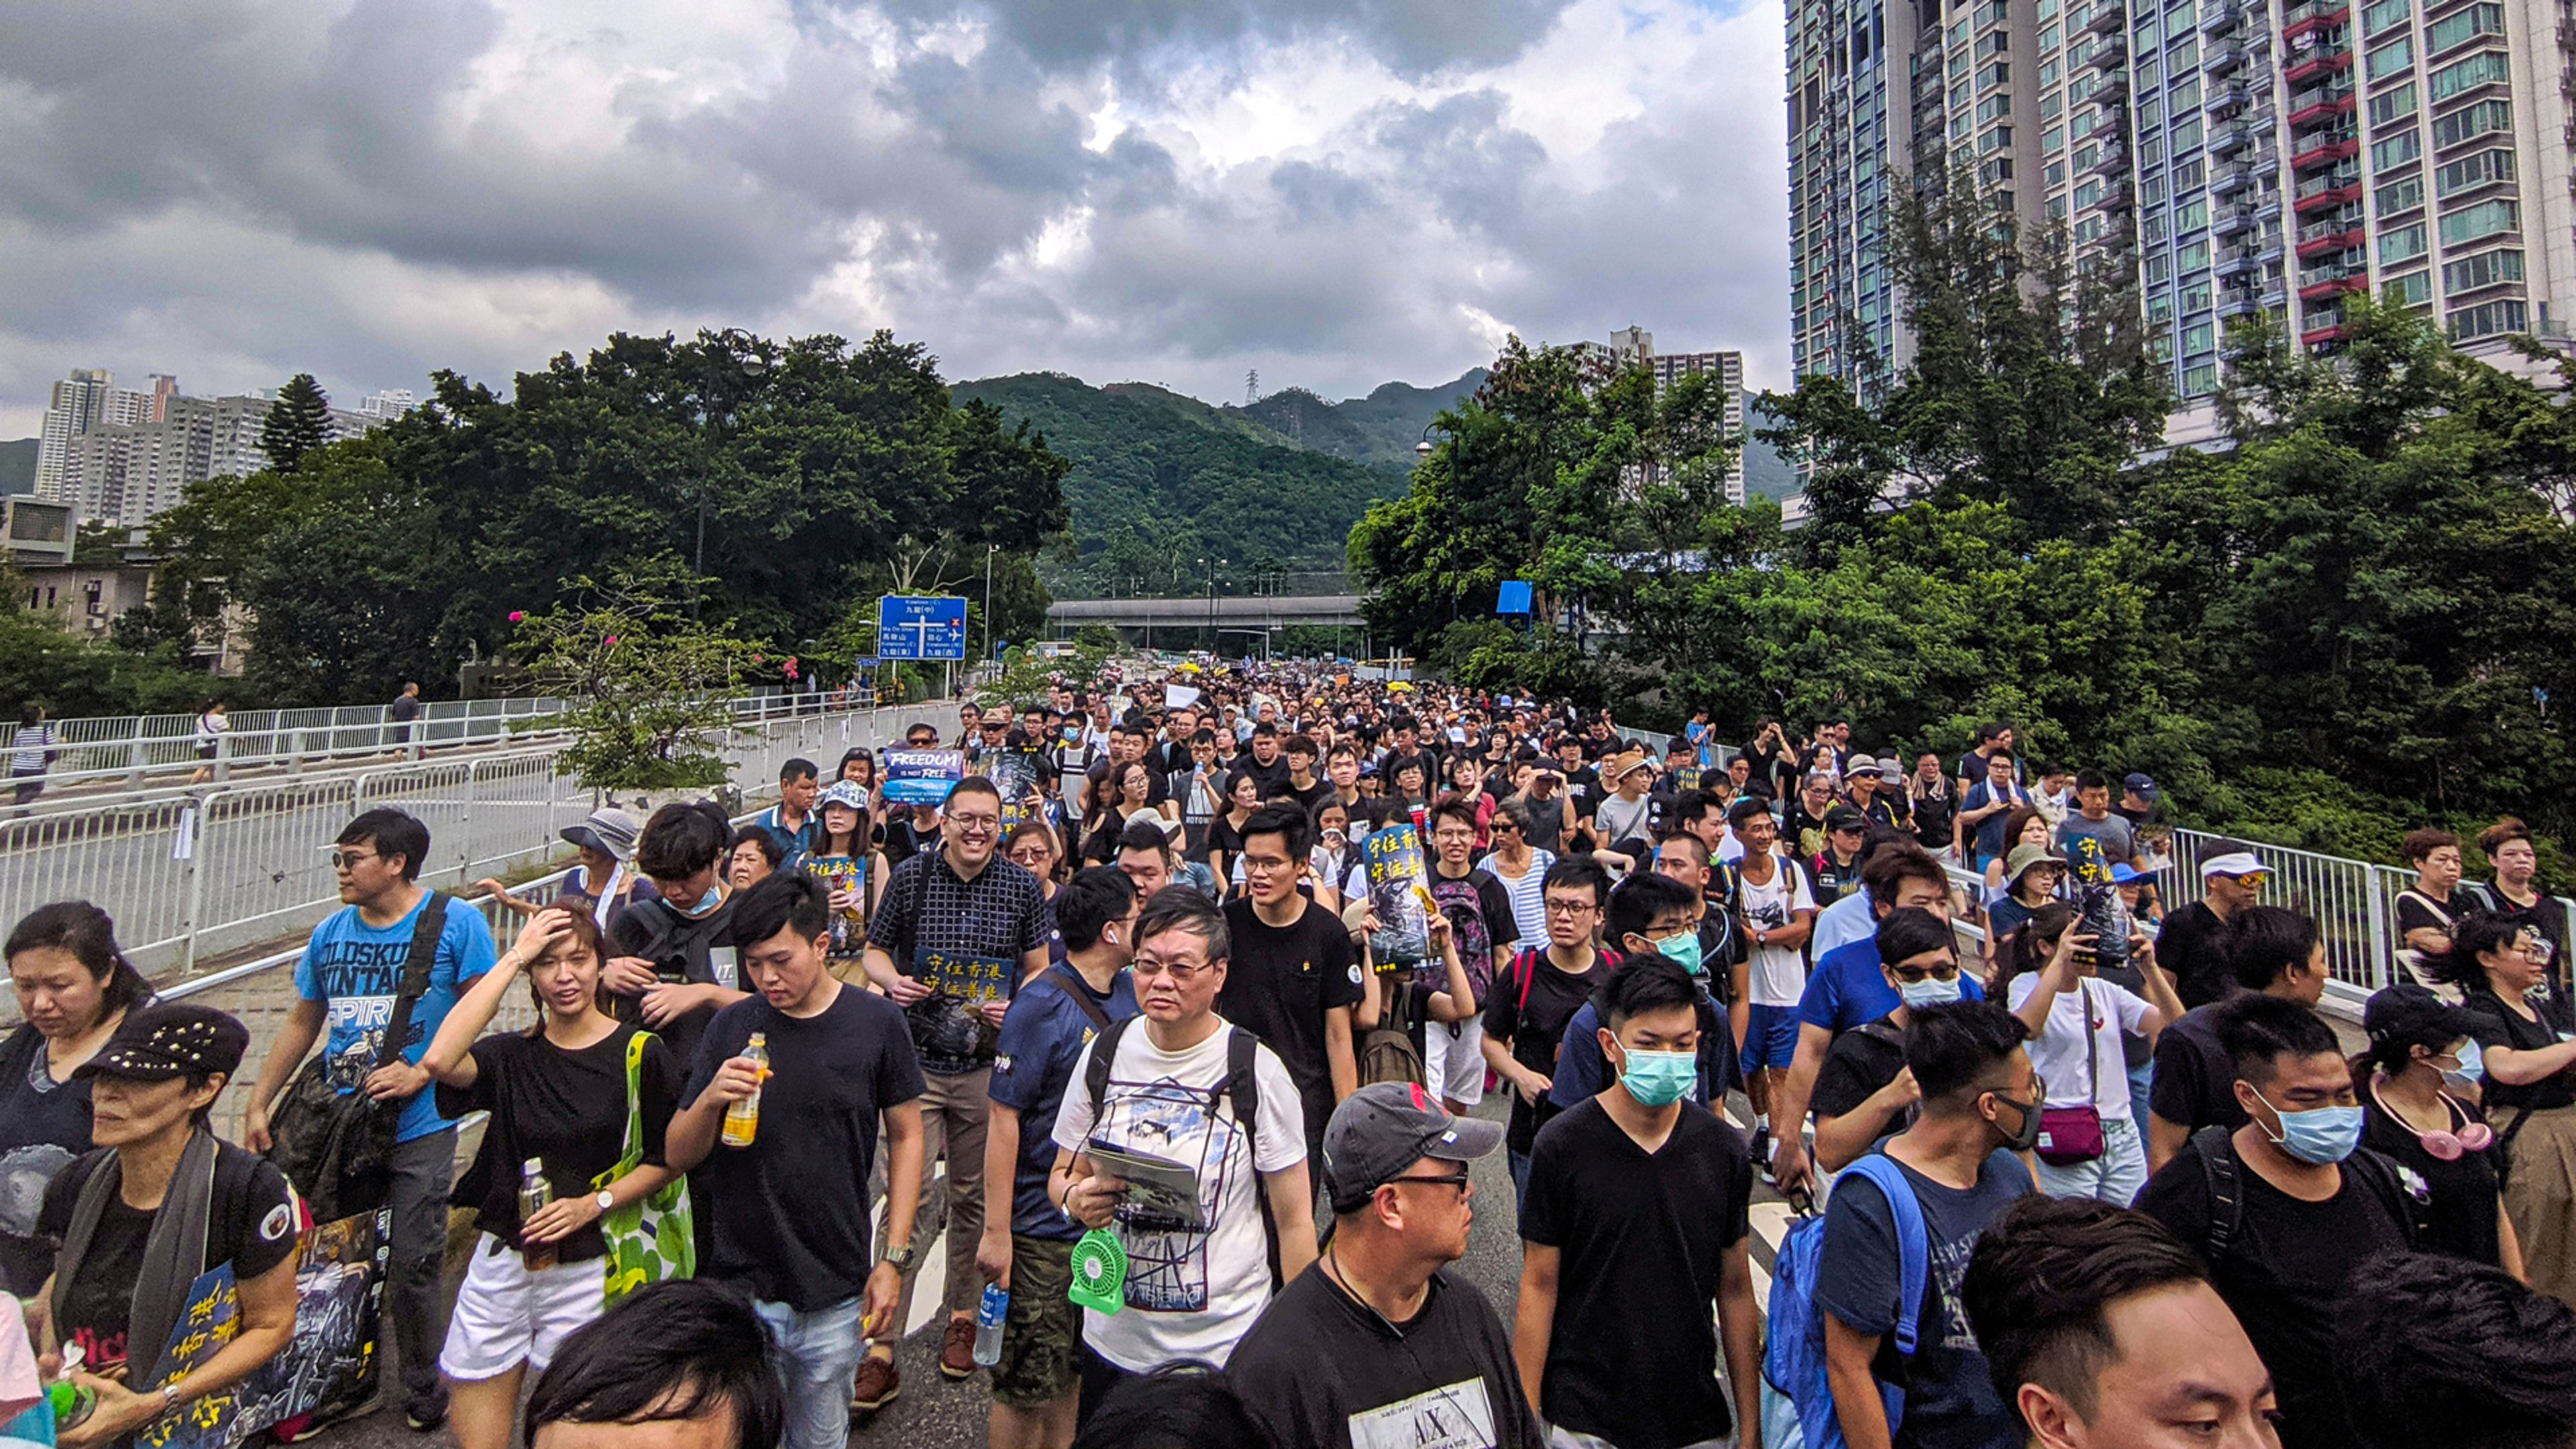 Hong Kong will withdraw the controversial extradition bill in attempt to end protests